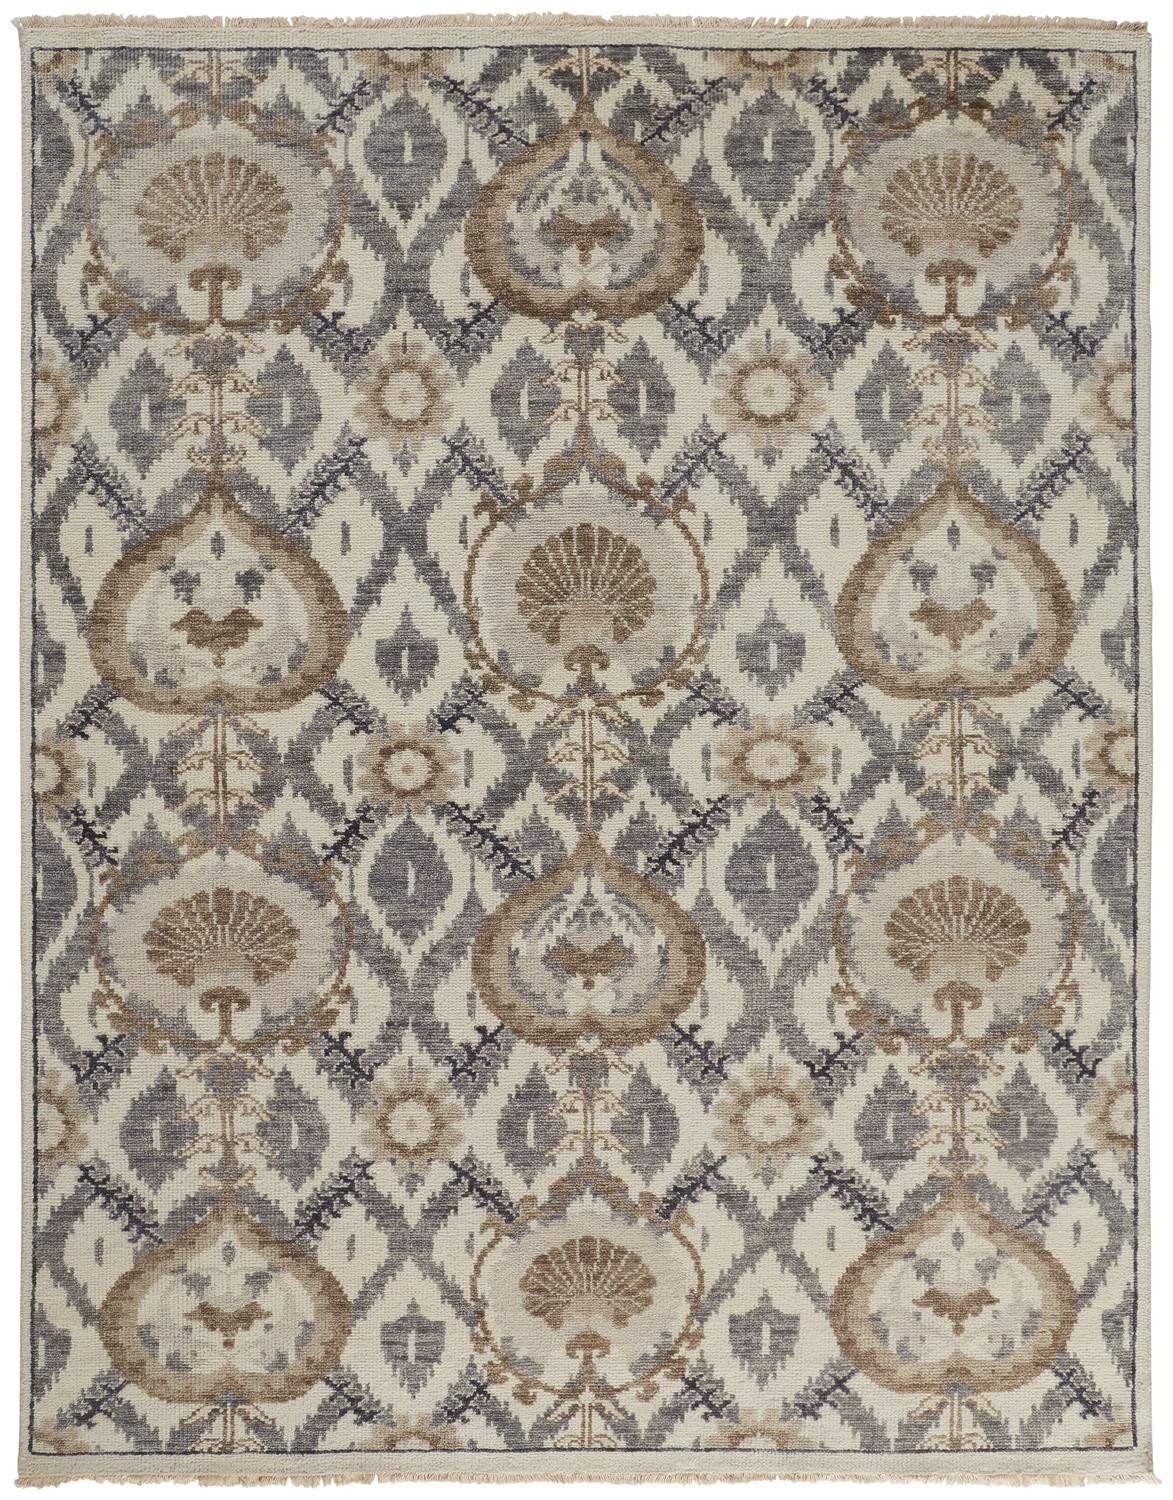 2' X 3' Ivory Gray And Taupe Wool Floral Hand Knotted Stain Resistant Area Rug-513109-1